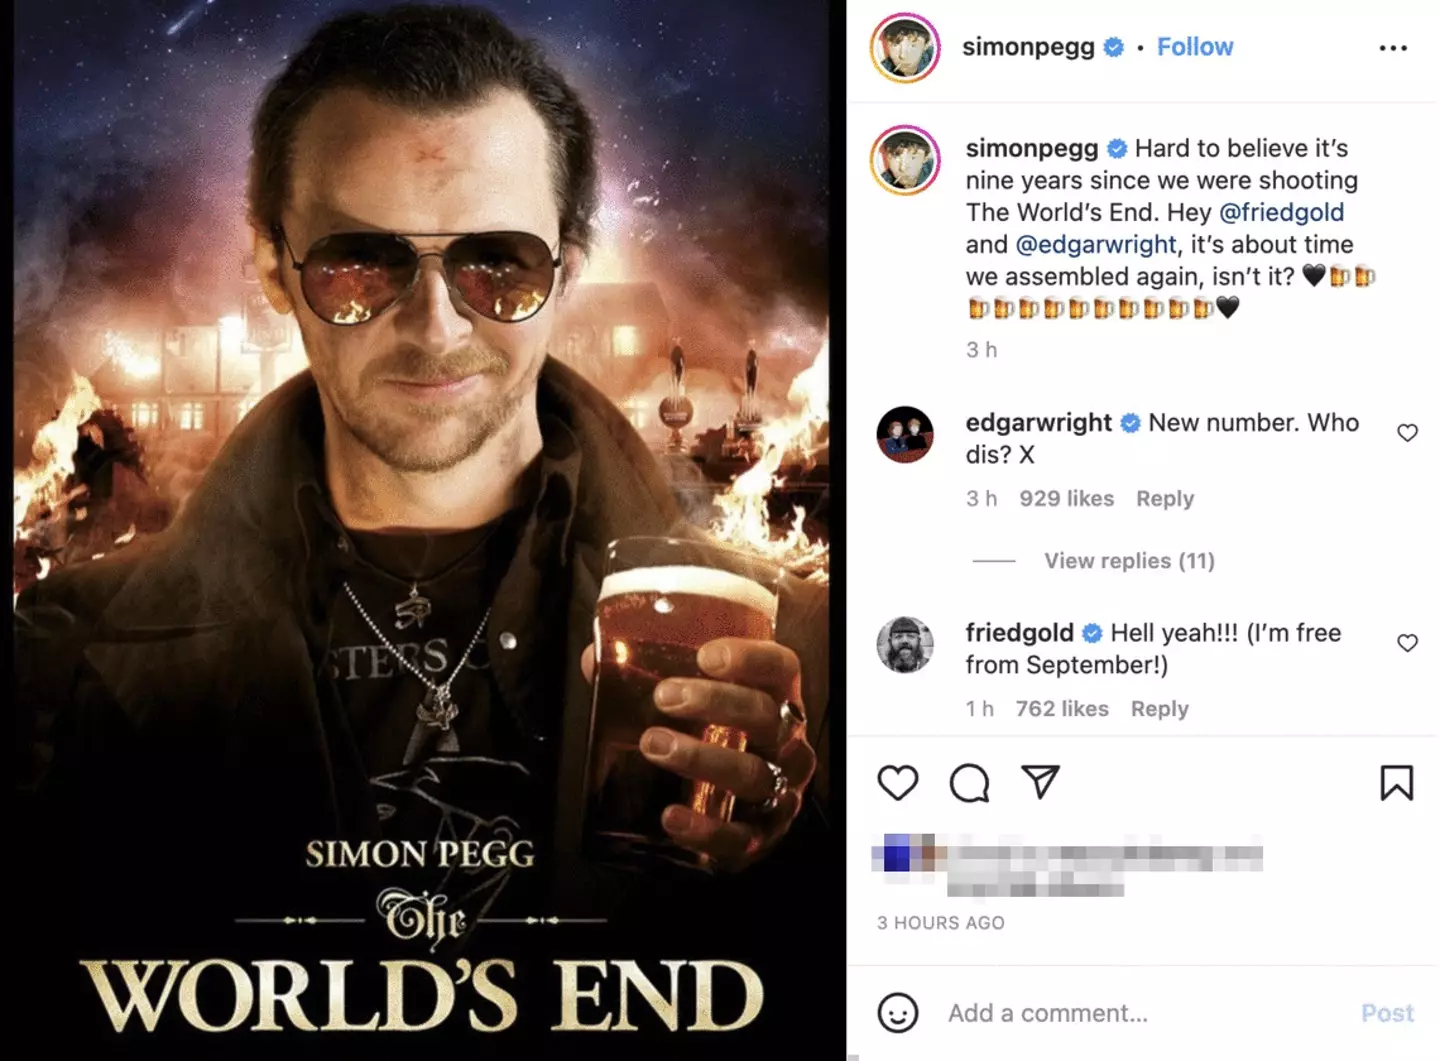 Pegg and co teased a new film on social media.